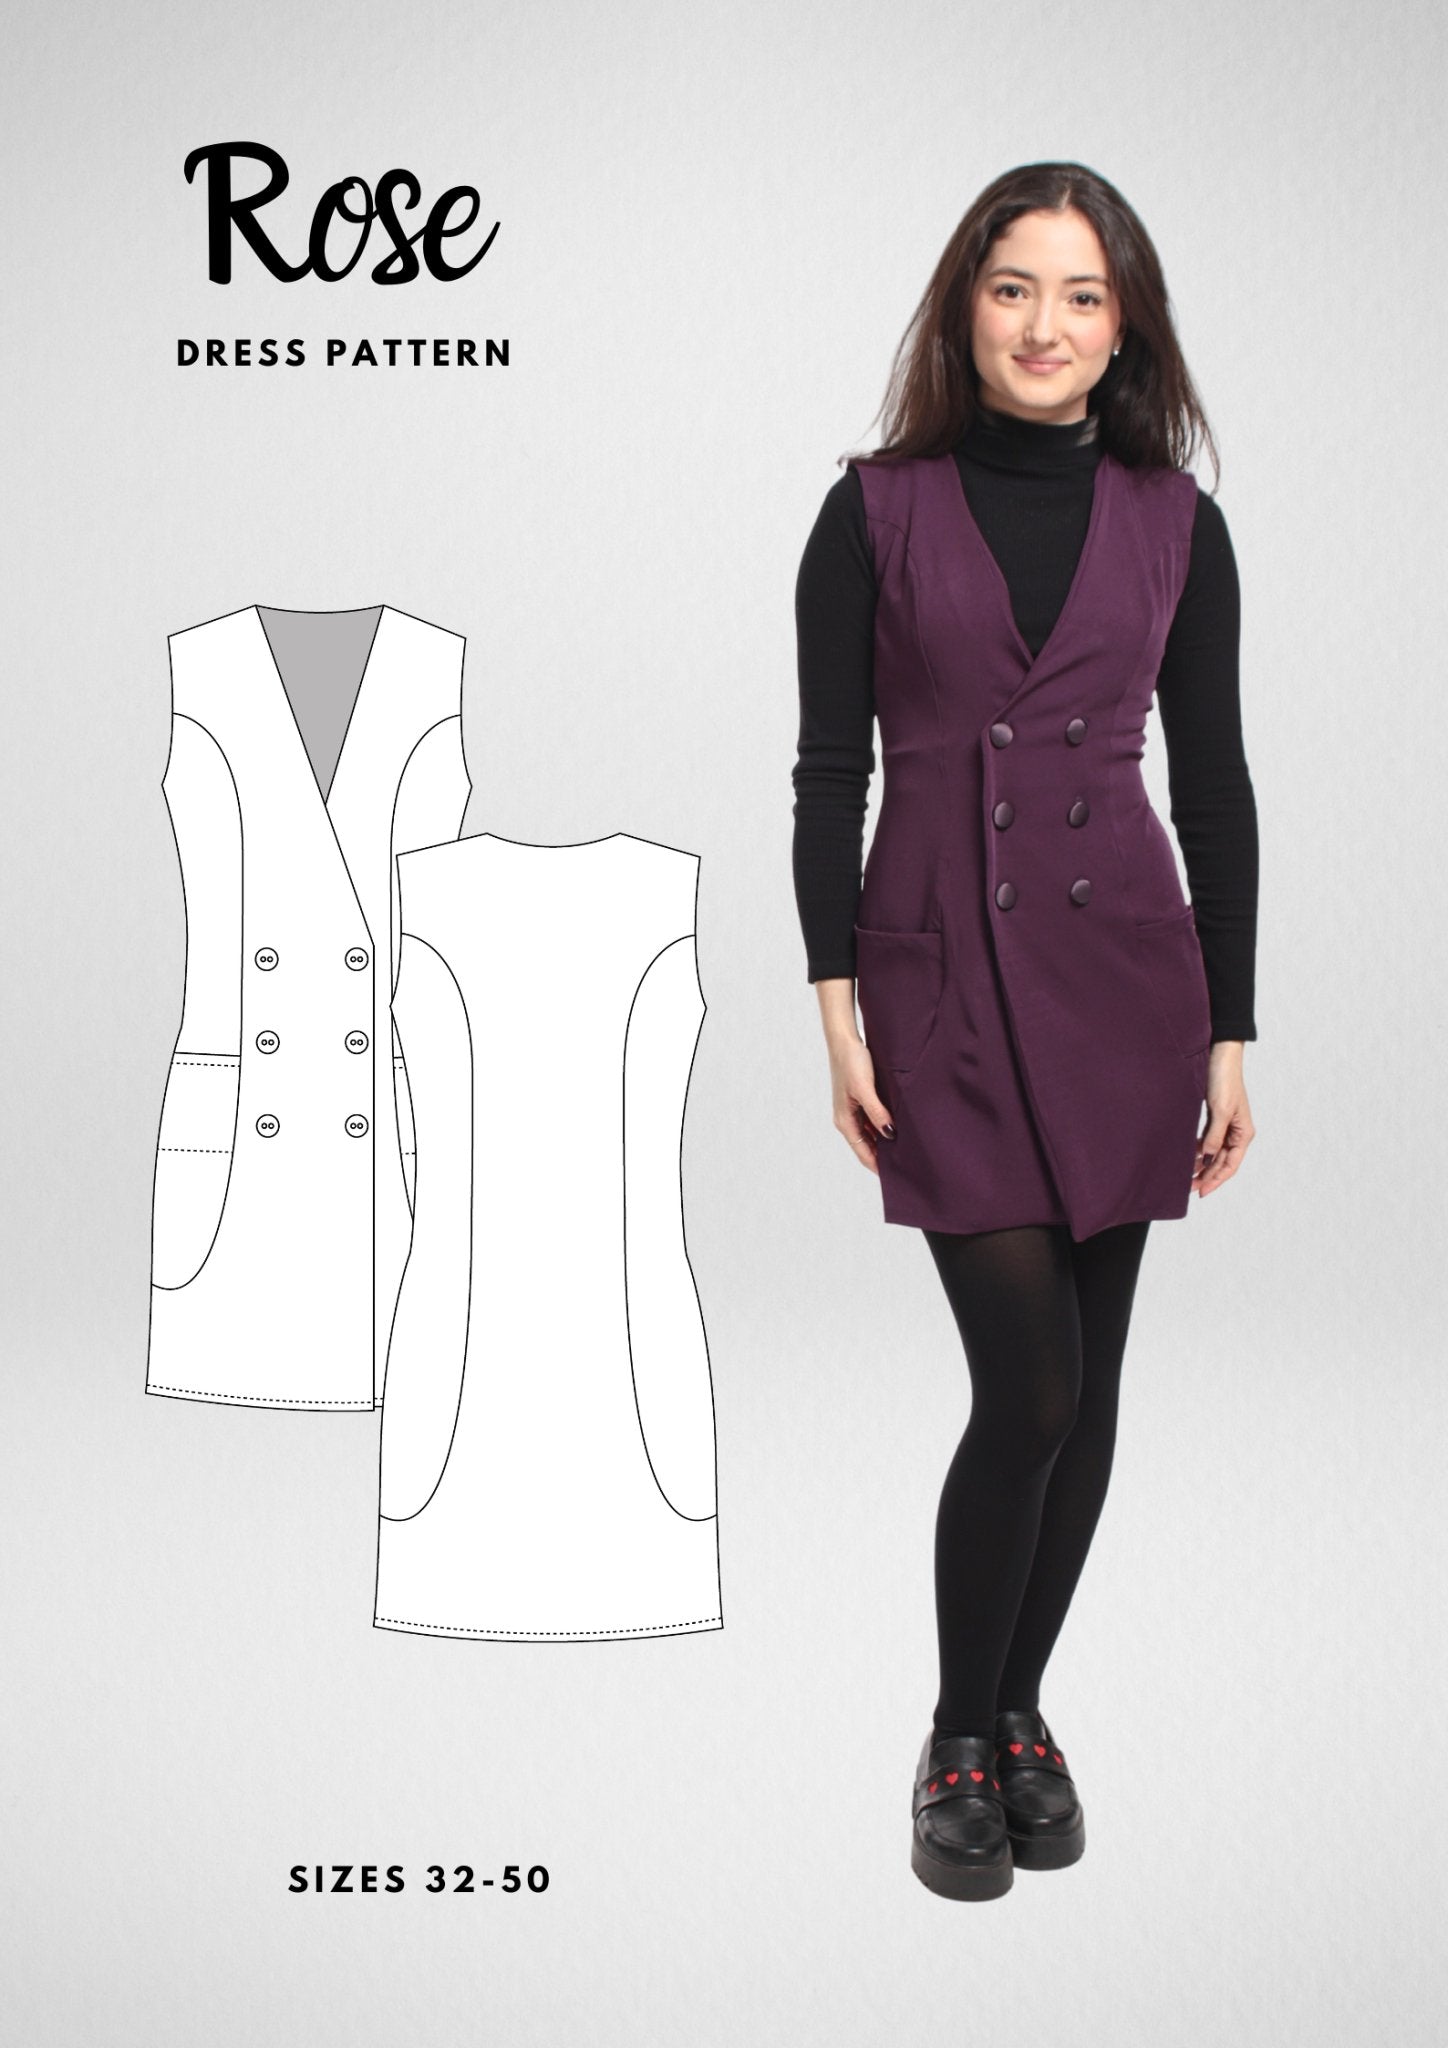 Preppy Button-Down Dress with Pockets [Sewing Pattern - 